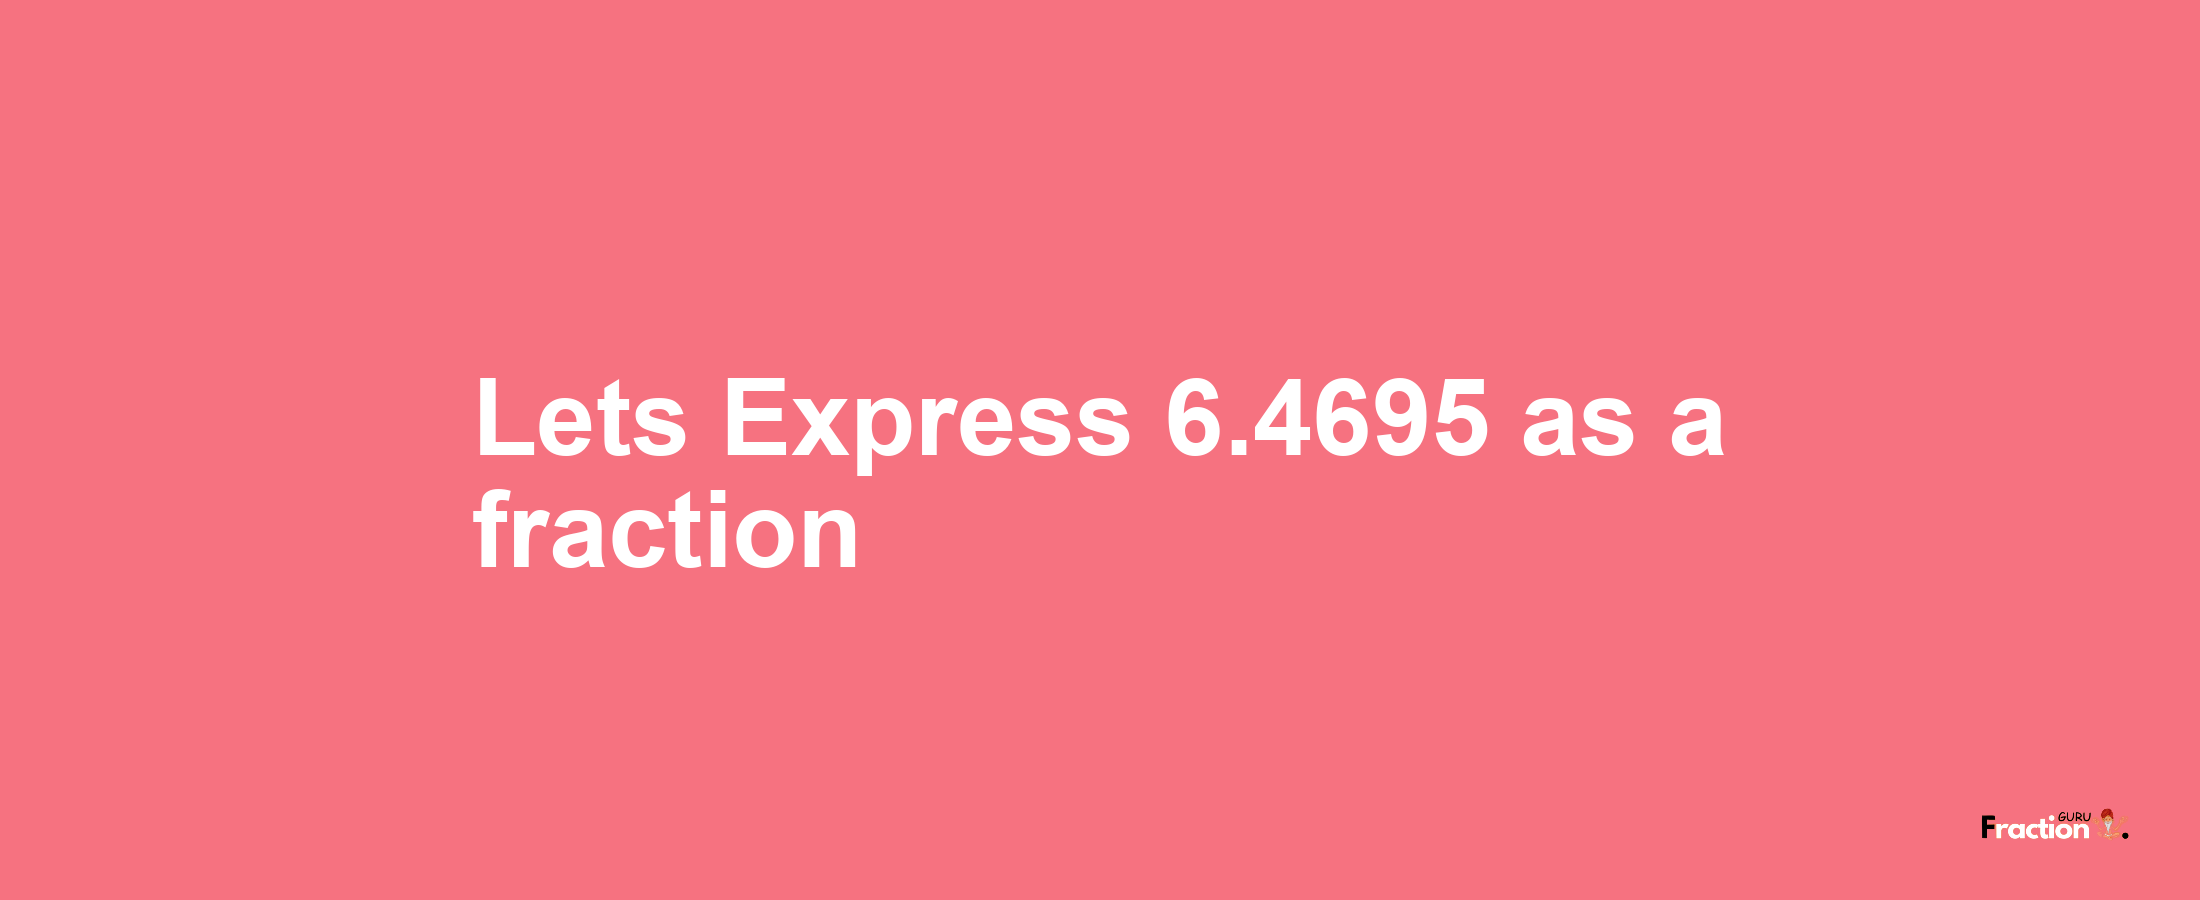 Lets Express 6.4695 as afraction